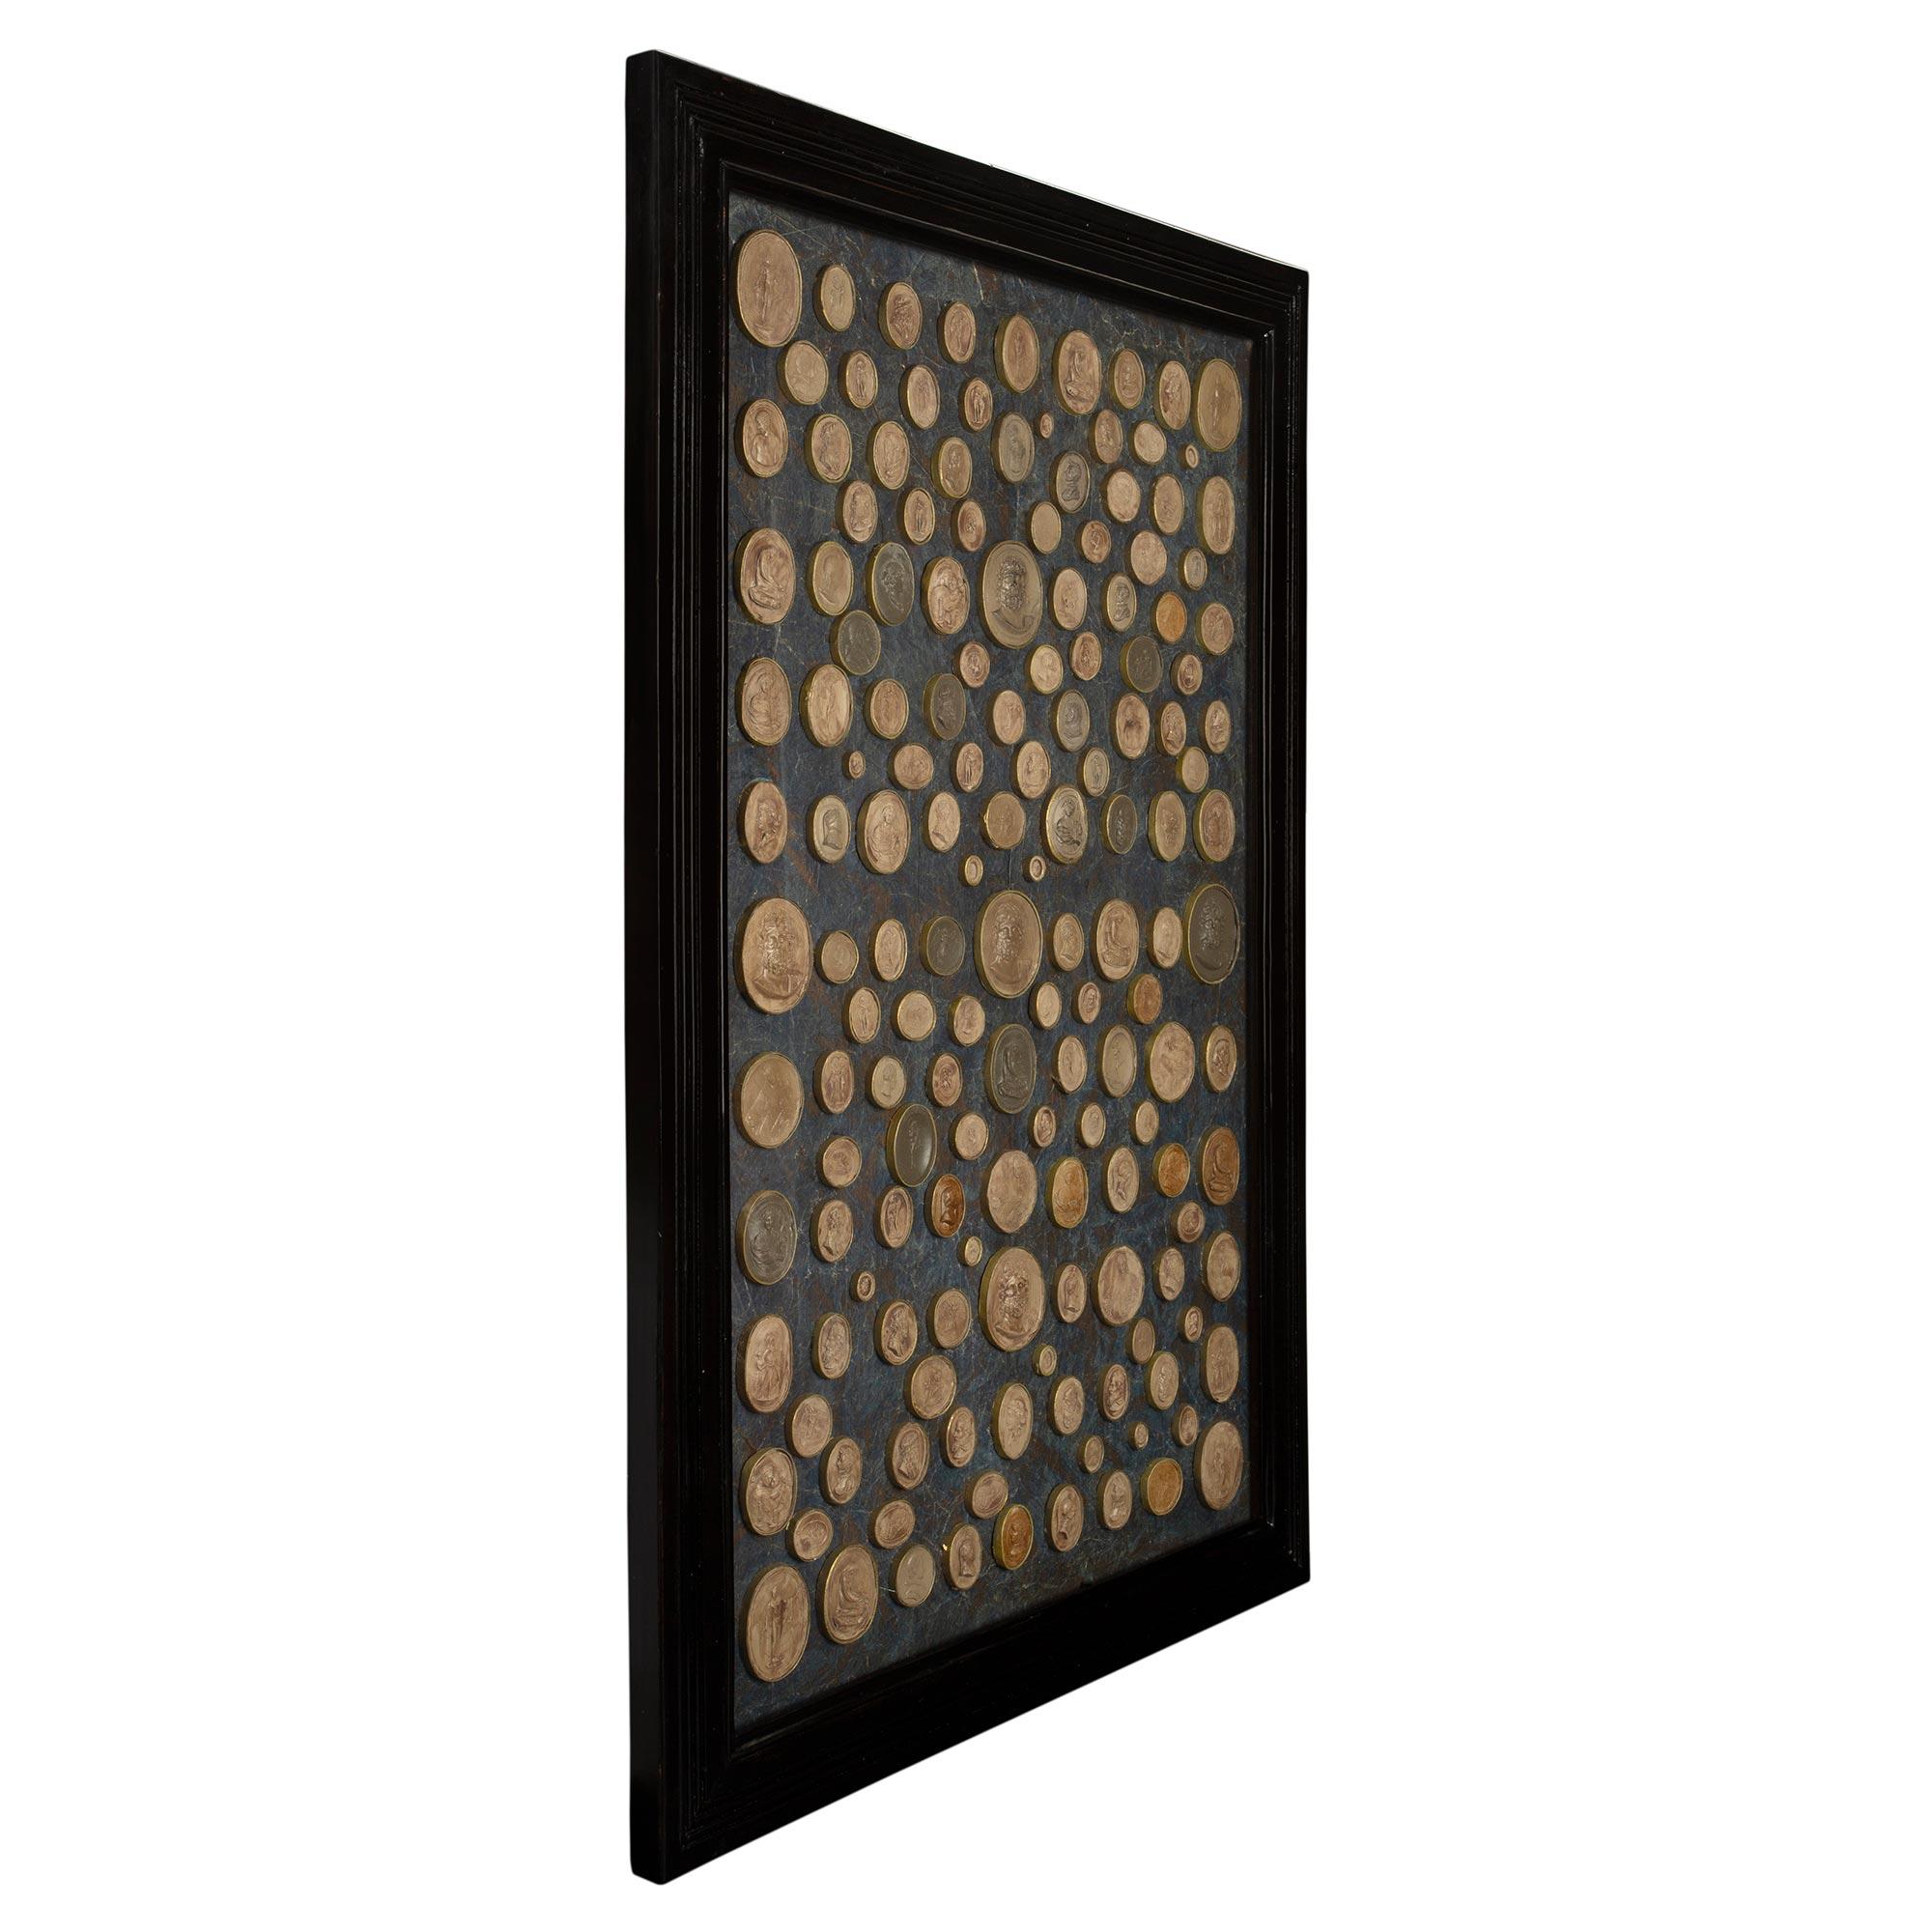 A very attractive and extremely decorative Italian 18th Century collection of wax reliefs. The seals are framed within a period ebonized fruitwood mottled rectangular frame. The extensive collection of various sized busts of philosophers and